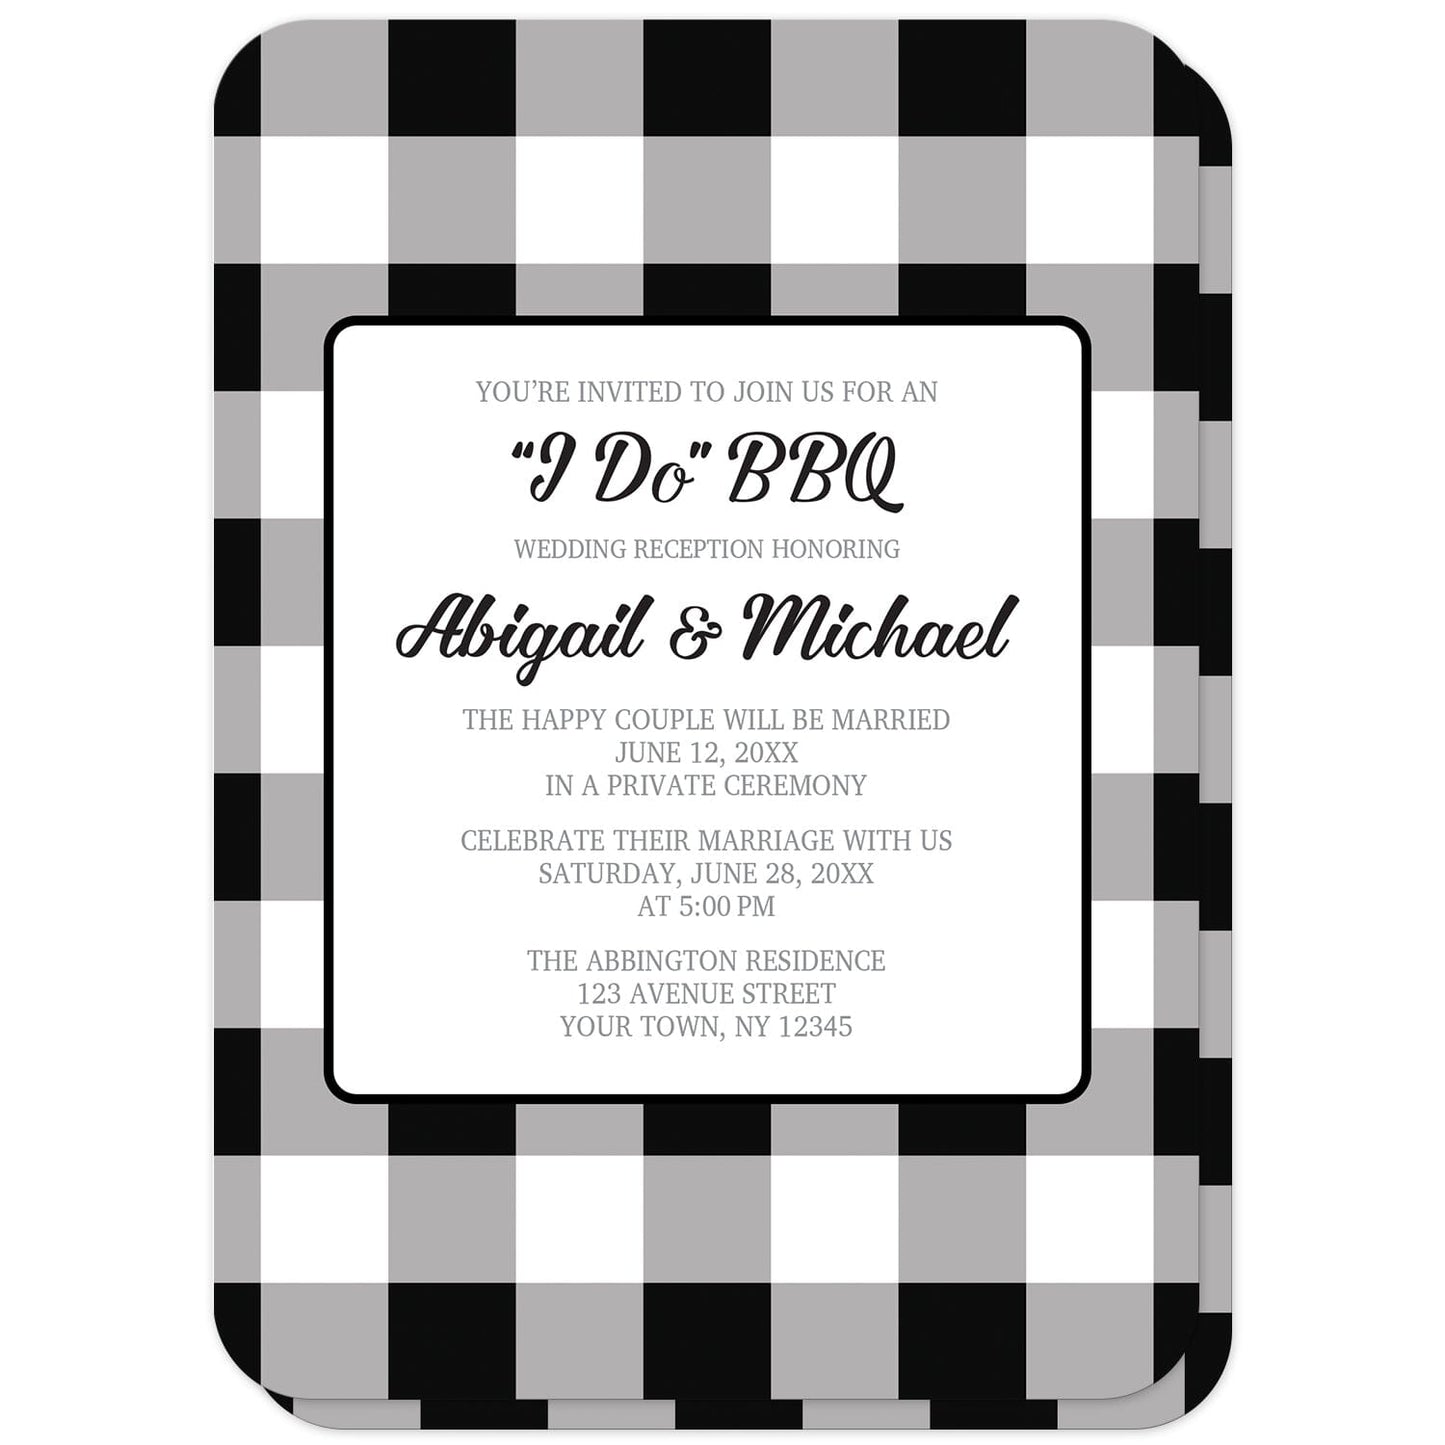 Black and White Buffalo Plaid I Do BBQ Reception Only Invitations (with rounded corners) at Artistically Invited. Buffalo plaid I Do BBQ reception only invitations with your personalized post-wedding reception details custom printed in black and gray inside a white rectangular area outlined in black. The background design is a black and white buffalo plaid (buffalo check) pattern which is also printed on the back side. 